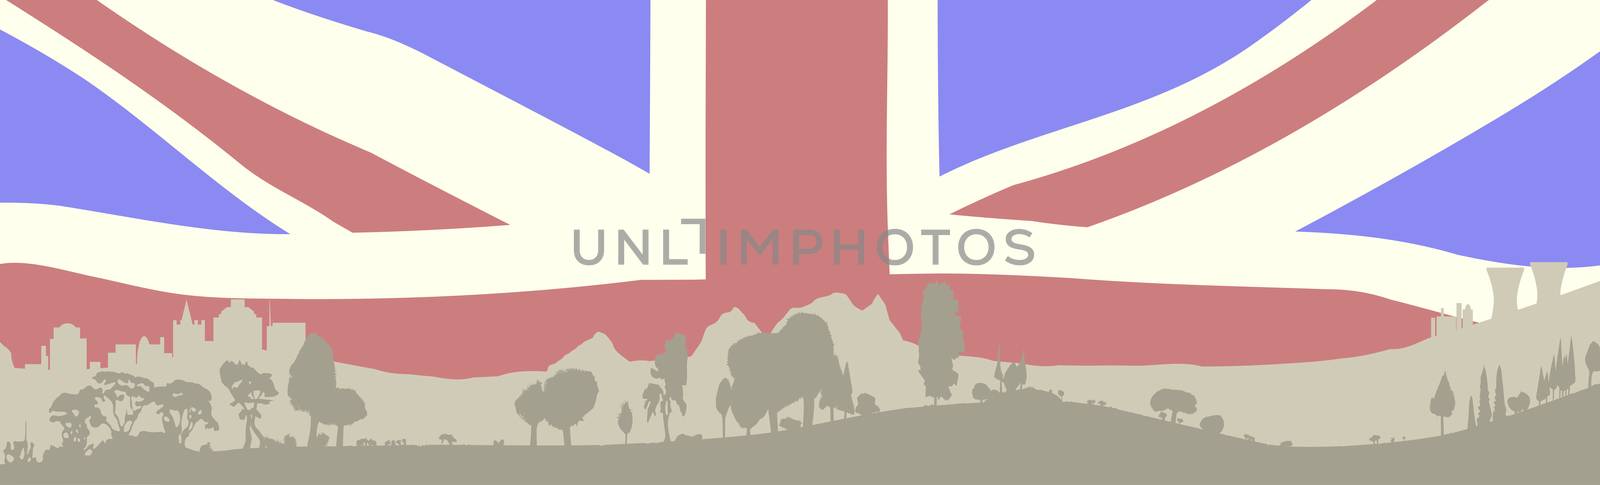 Silhouette of a wooded foreground set on a hill background with buildings anf faded Union Jack flag